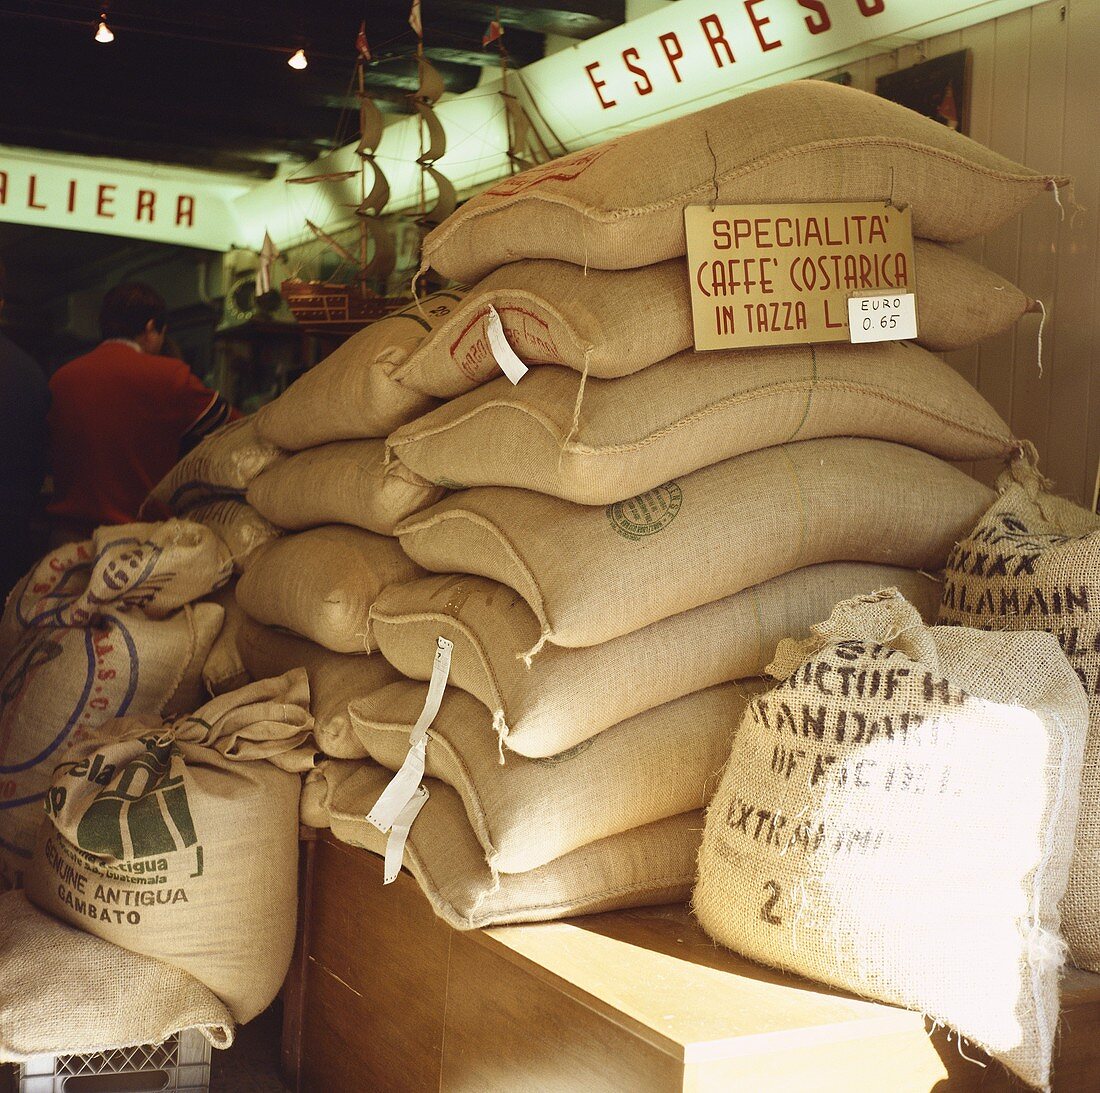 Sacks of coffee beans in the stockroom of a café